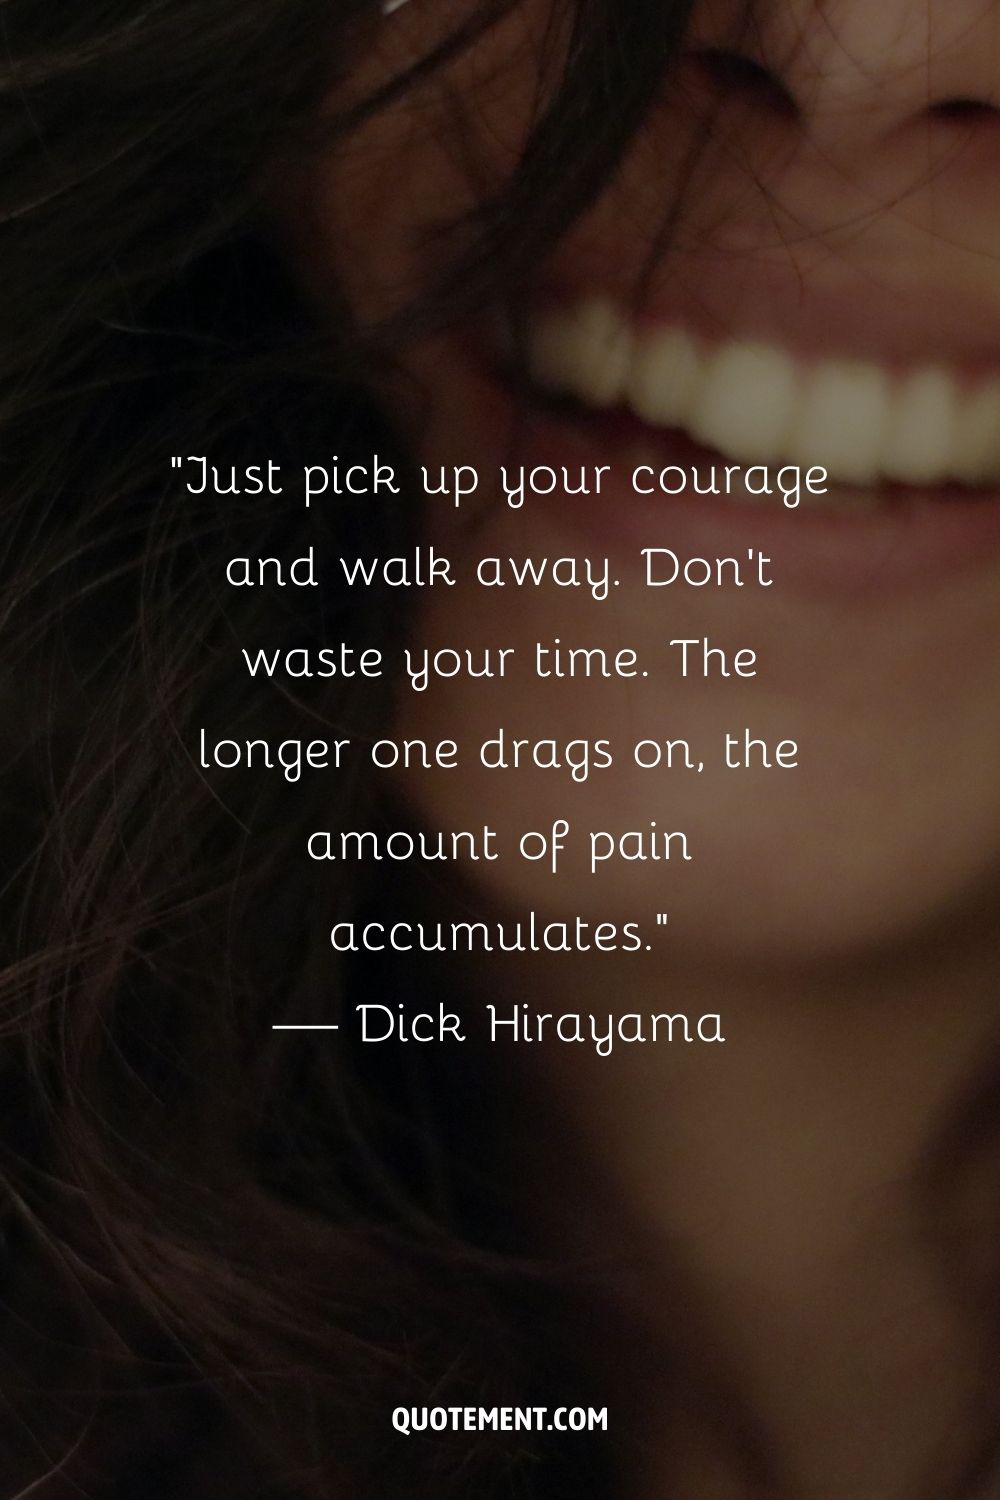 Woman's smile, obscured face representing walking away from drama quote